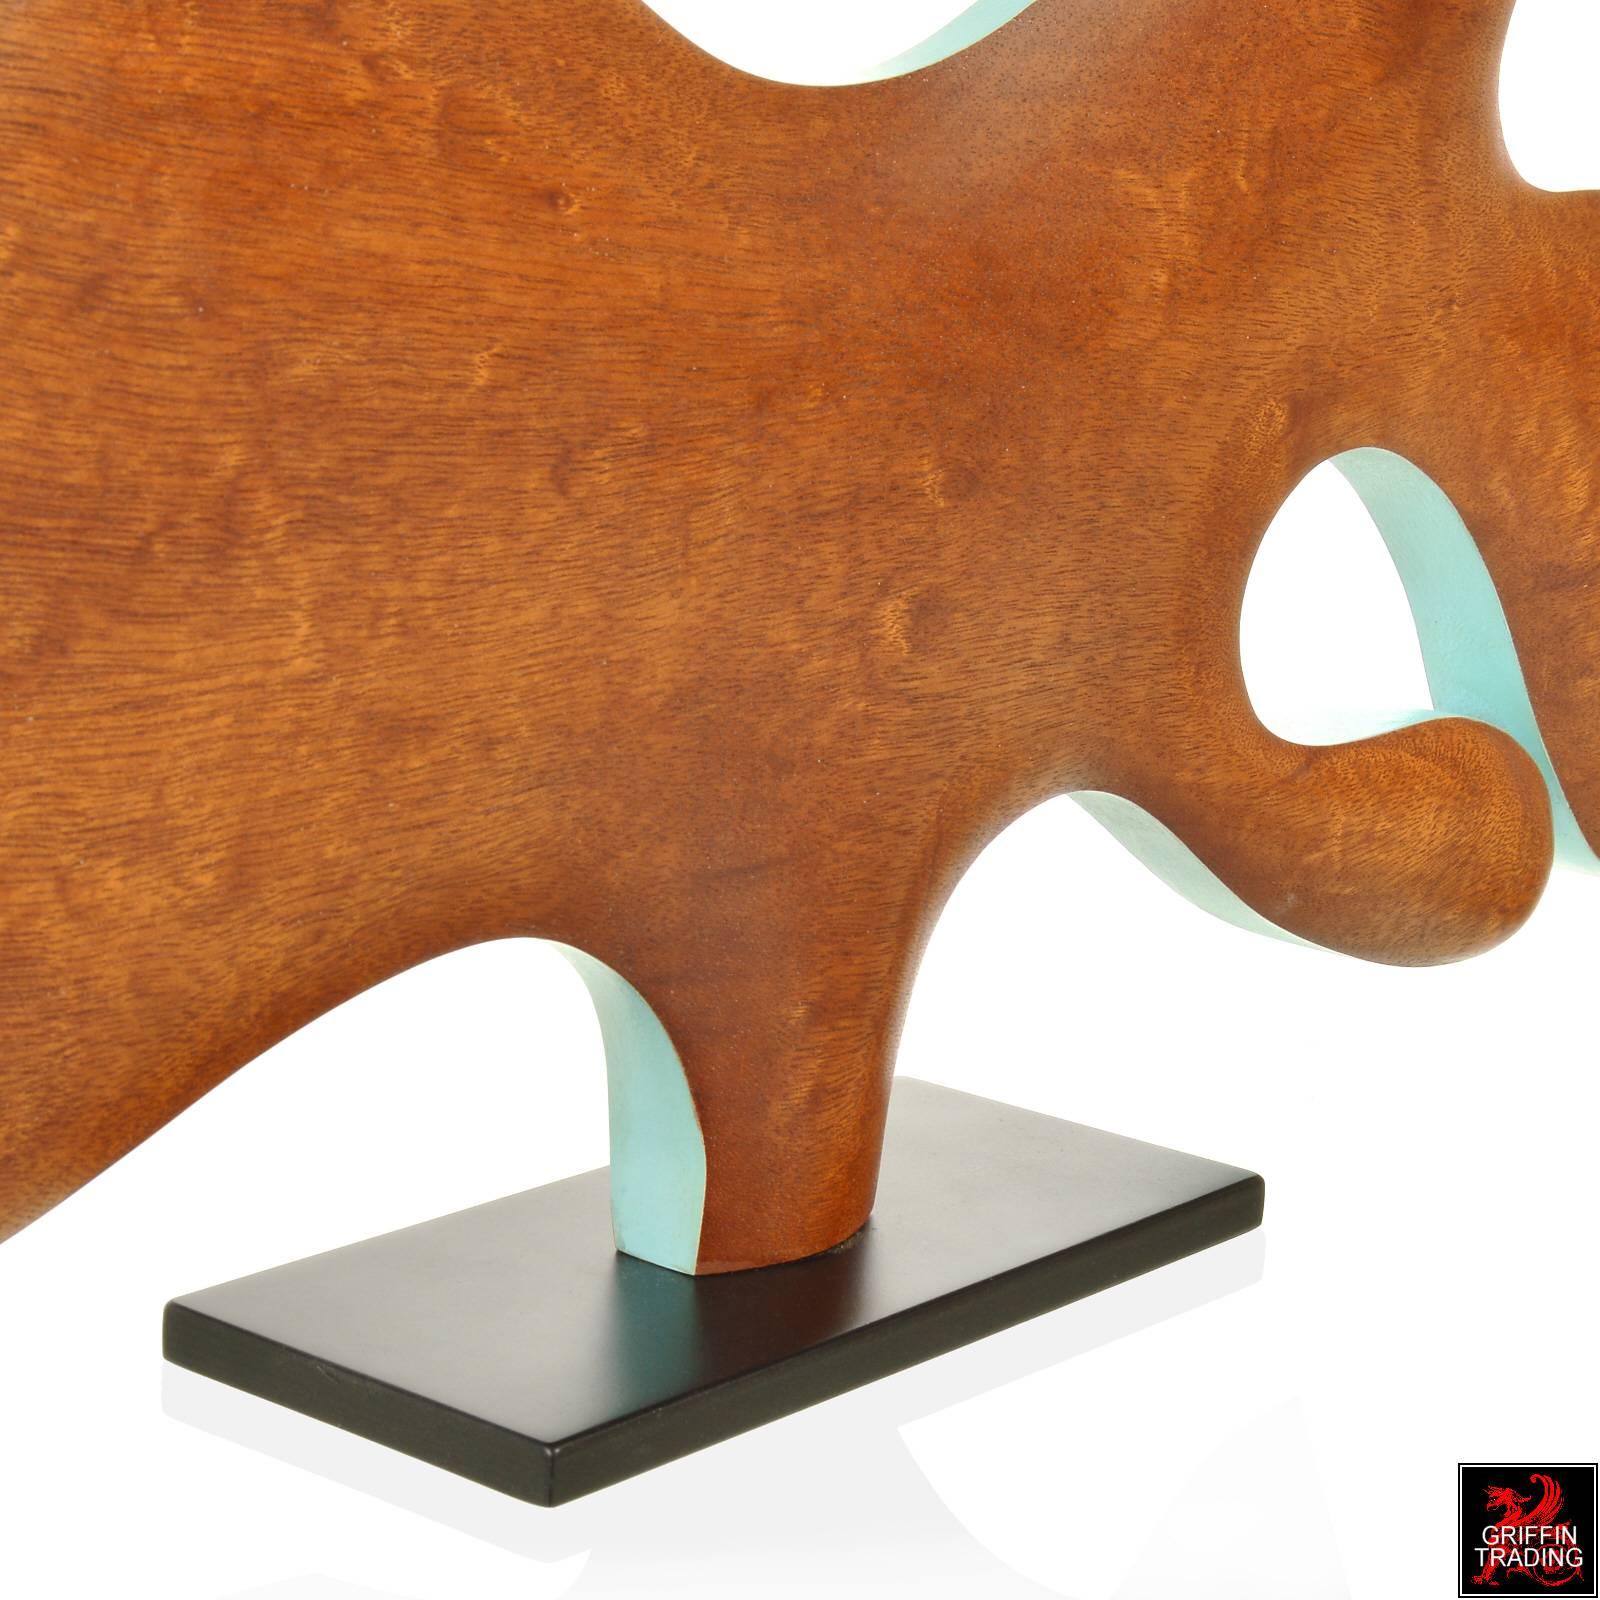 Mahogany DRH1 Modern Wood Sculpture For Sale